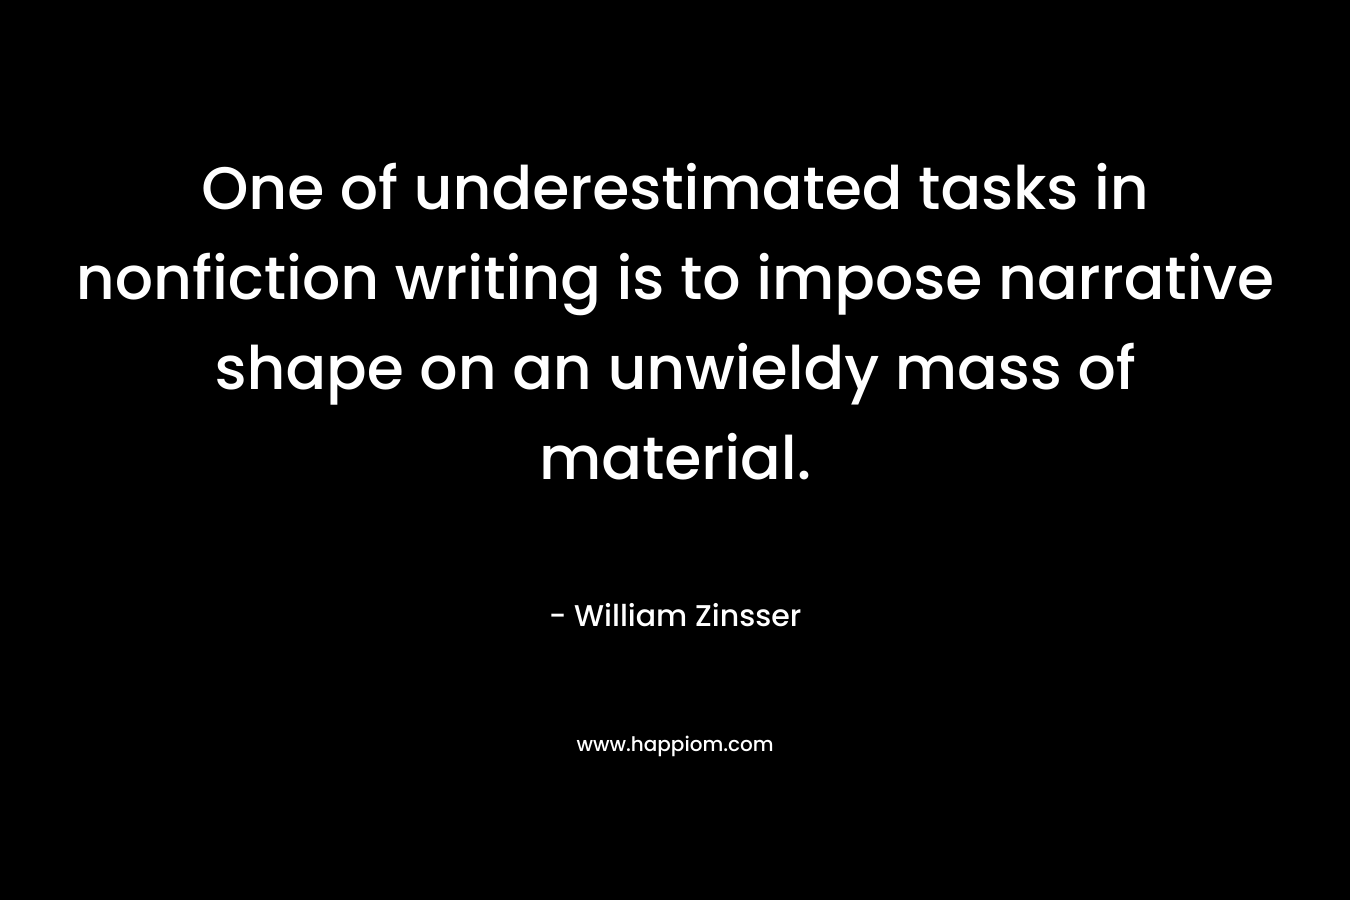 One of underestimated tasks in nonfiction writing is to impose narrative shape on an unwieldy mass of material. – William Zinsser